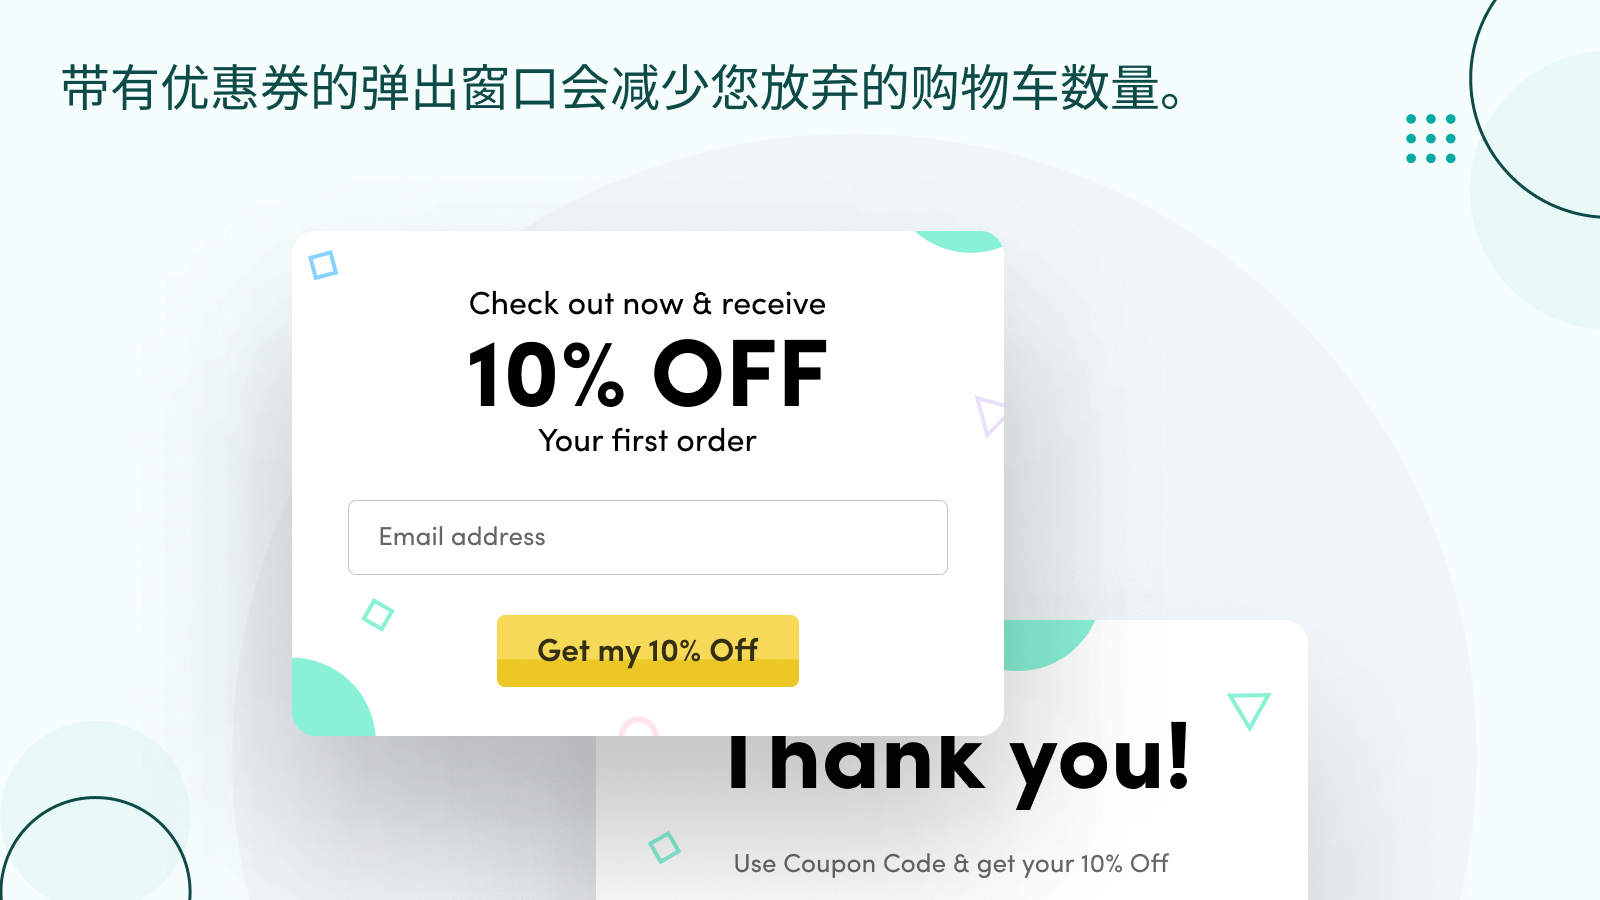 Popups w/ Coupons减少您的ACR。